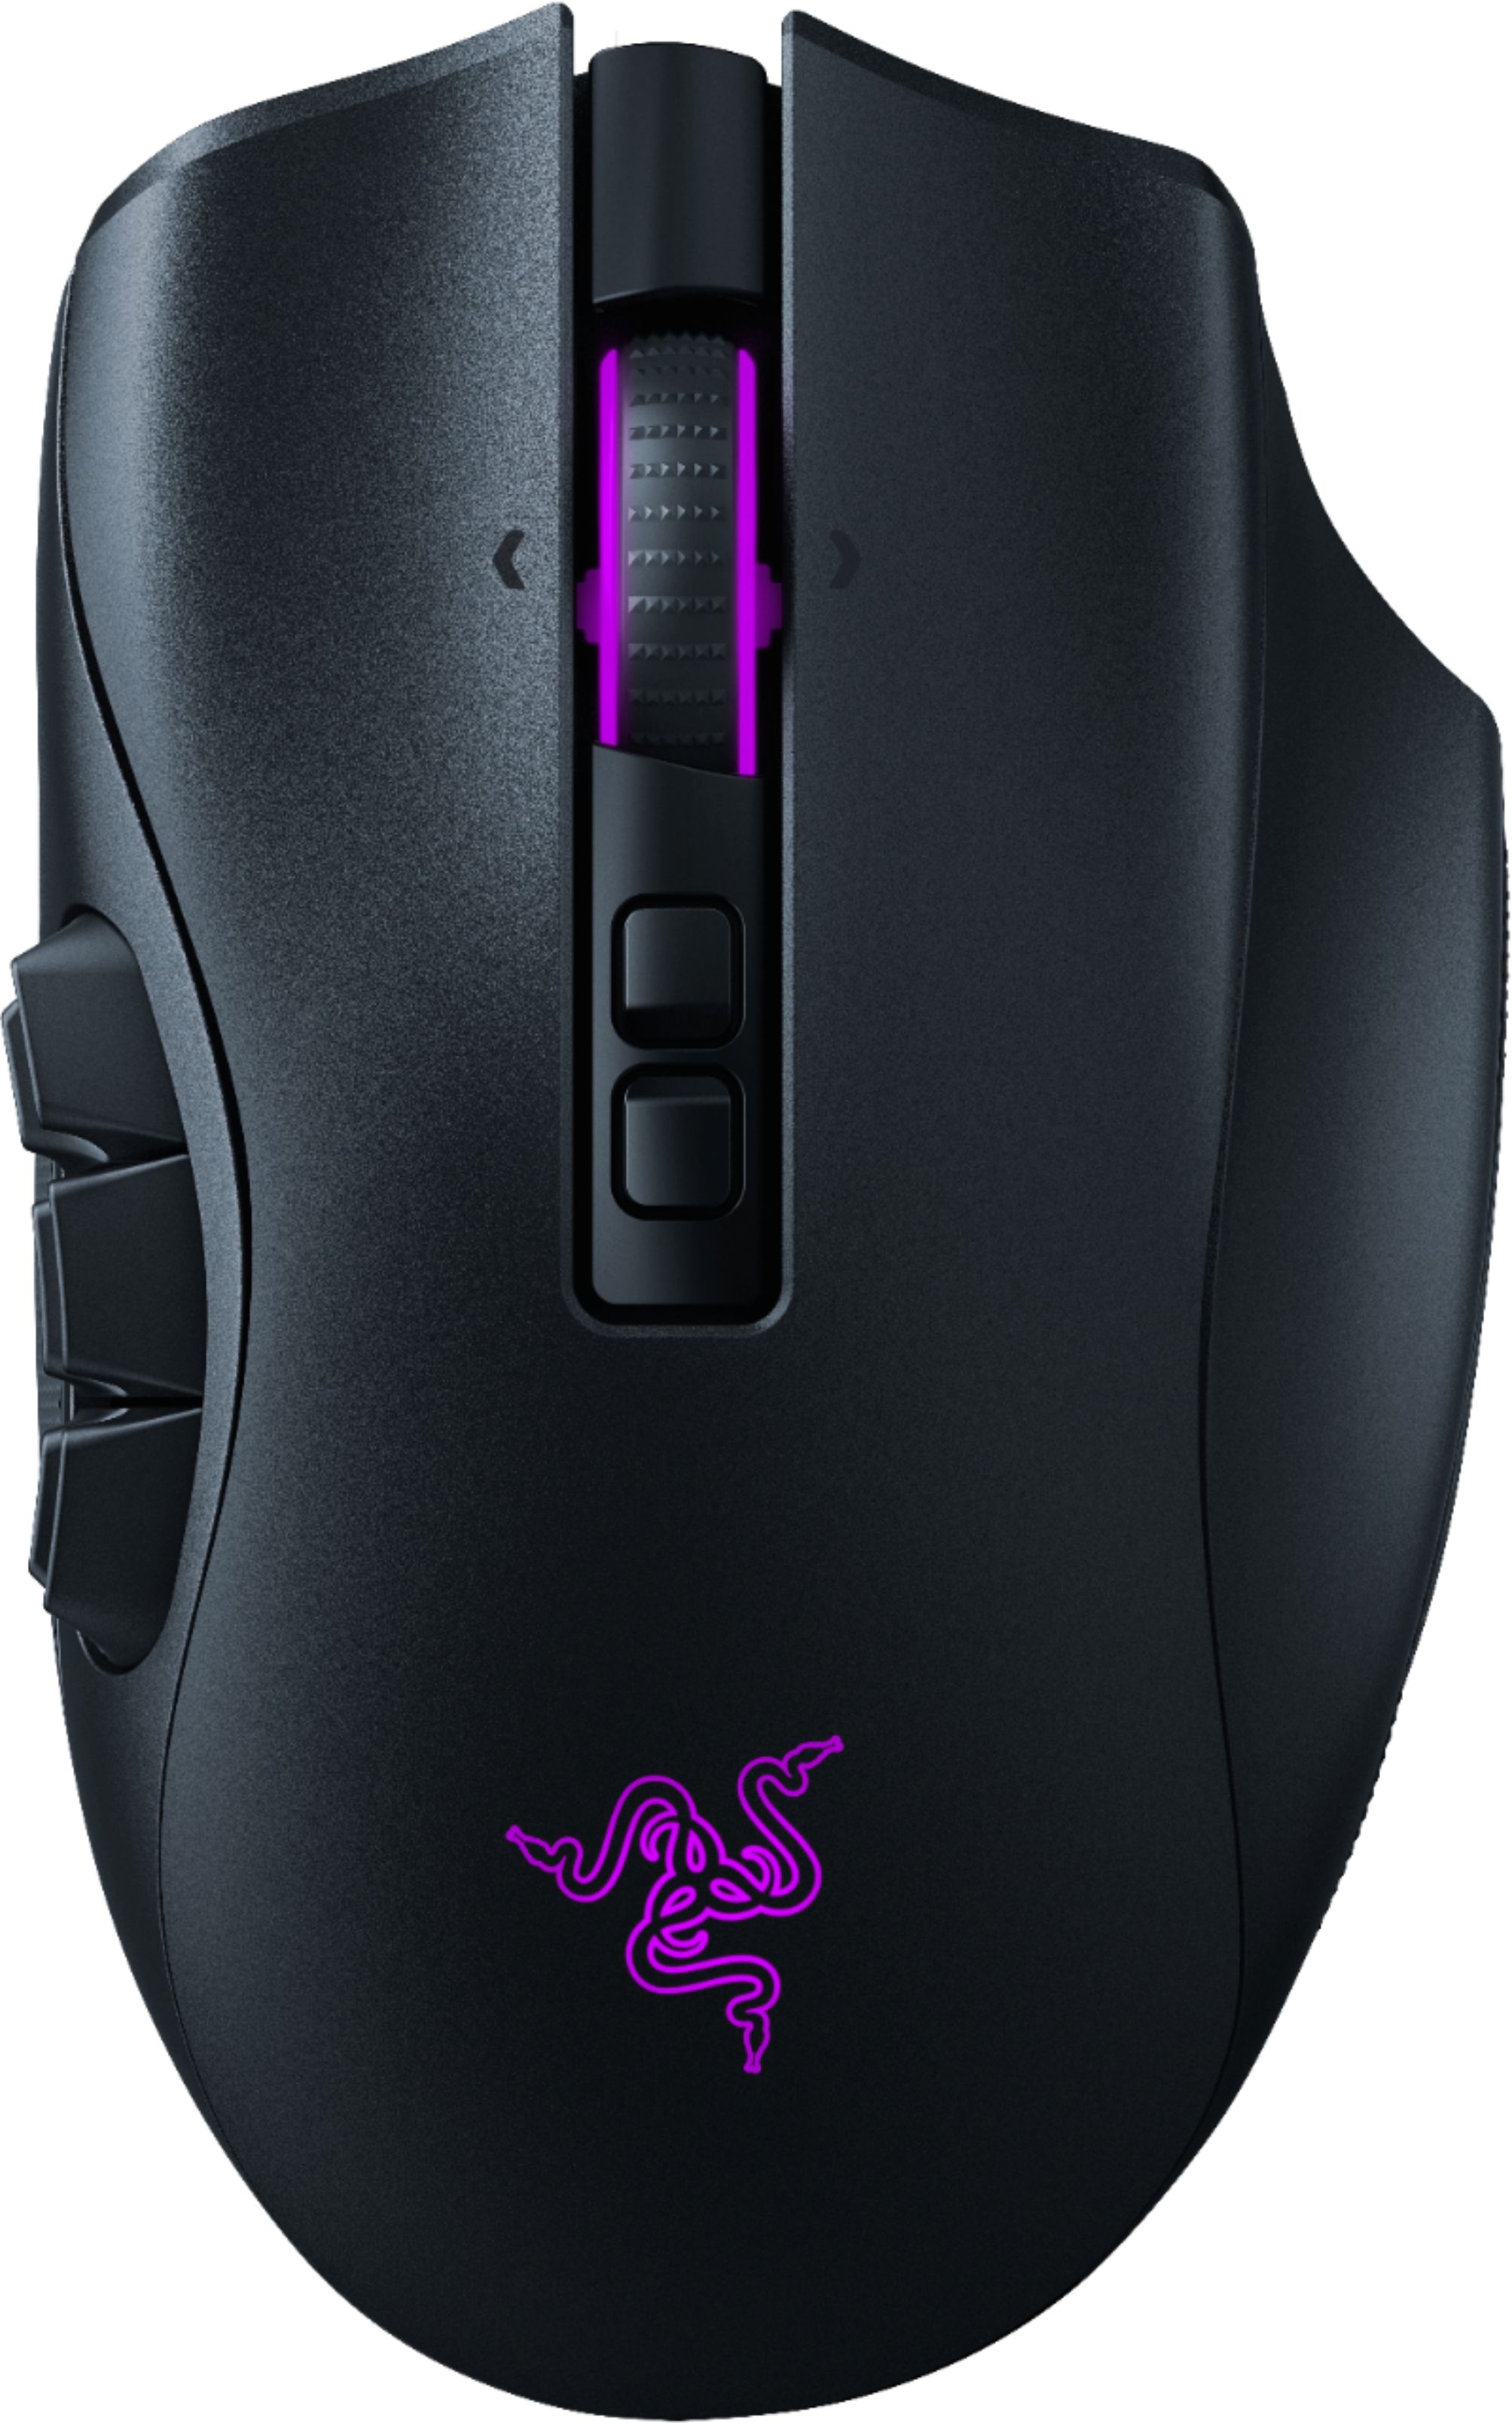 Razer Naga V2 Pro MMO Wireless Optical Gaming Mouse with Interchangeable  Side Plates in 2, 6, 12 Button Configurations Black RZ01-04400100-R3U1 -  Best